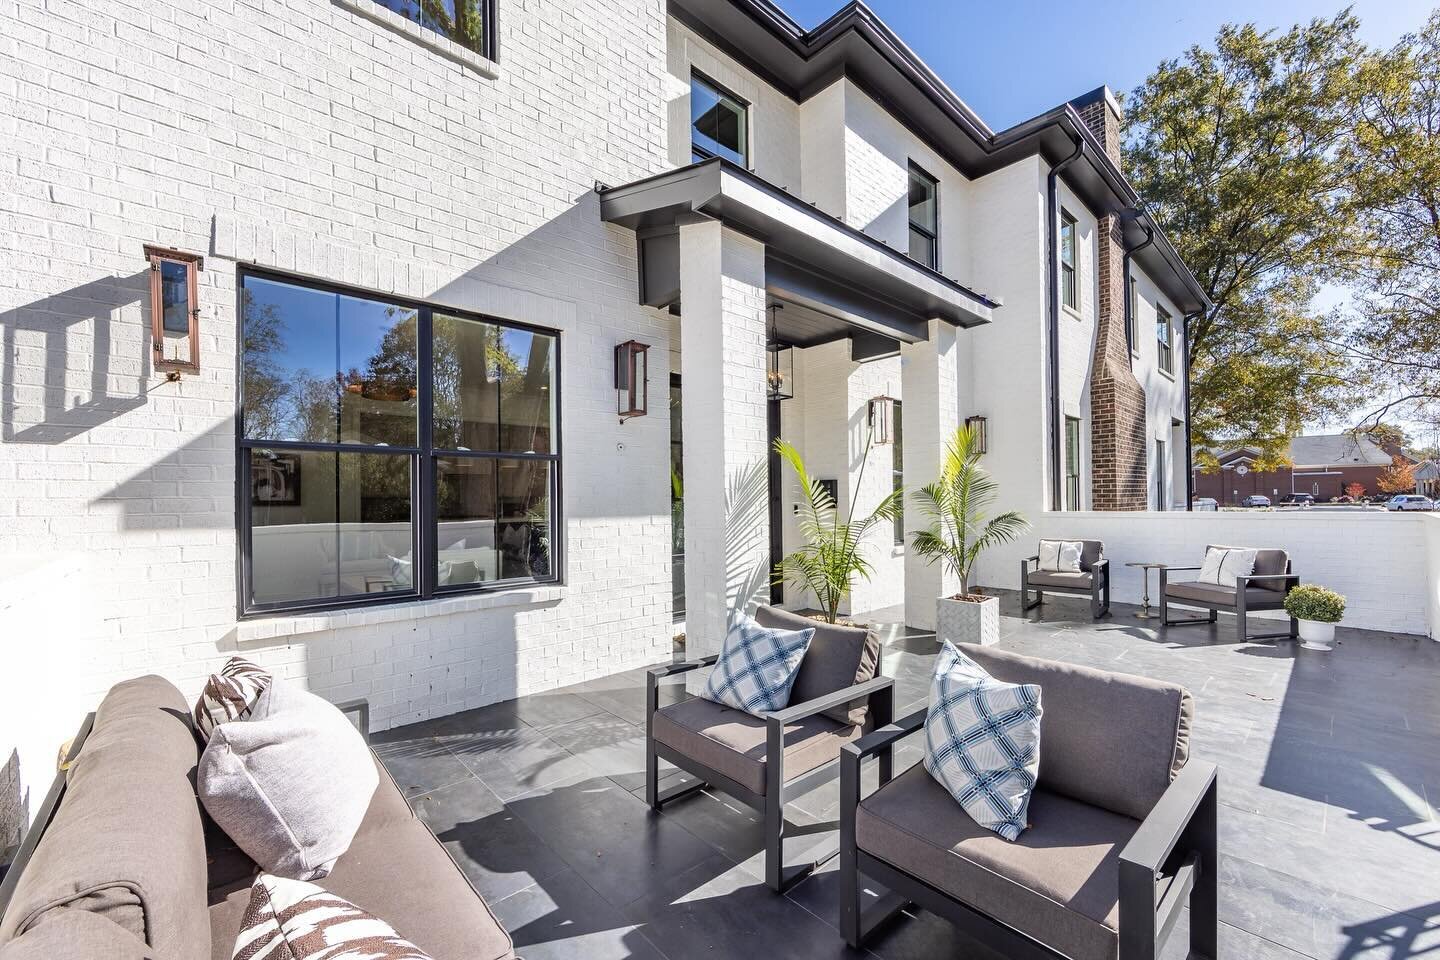 Infusing modernity with warmth, this patio space is designed to welcome with its crisp white brick contrasted by the sleek slate tiles. Add some plush seating and vibrant greenery, get comfy, and enjoy long conversations and serene moments! ☀️

Build